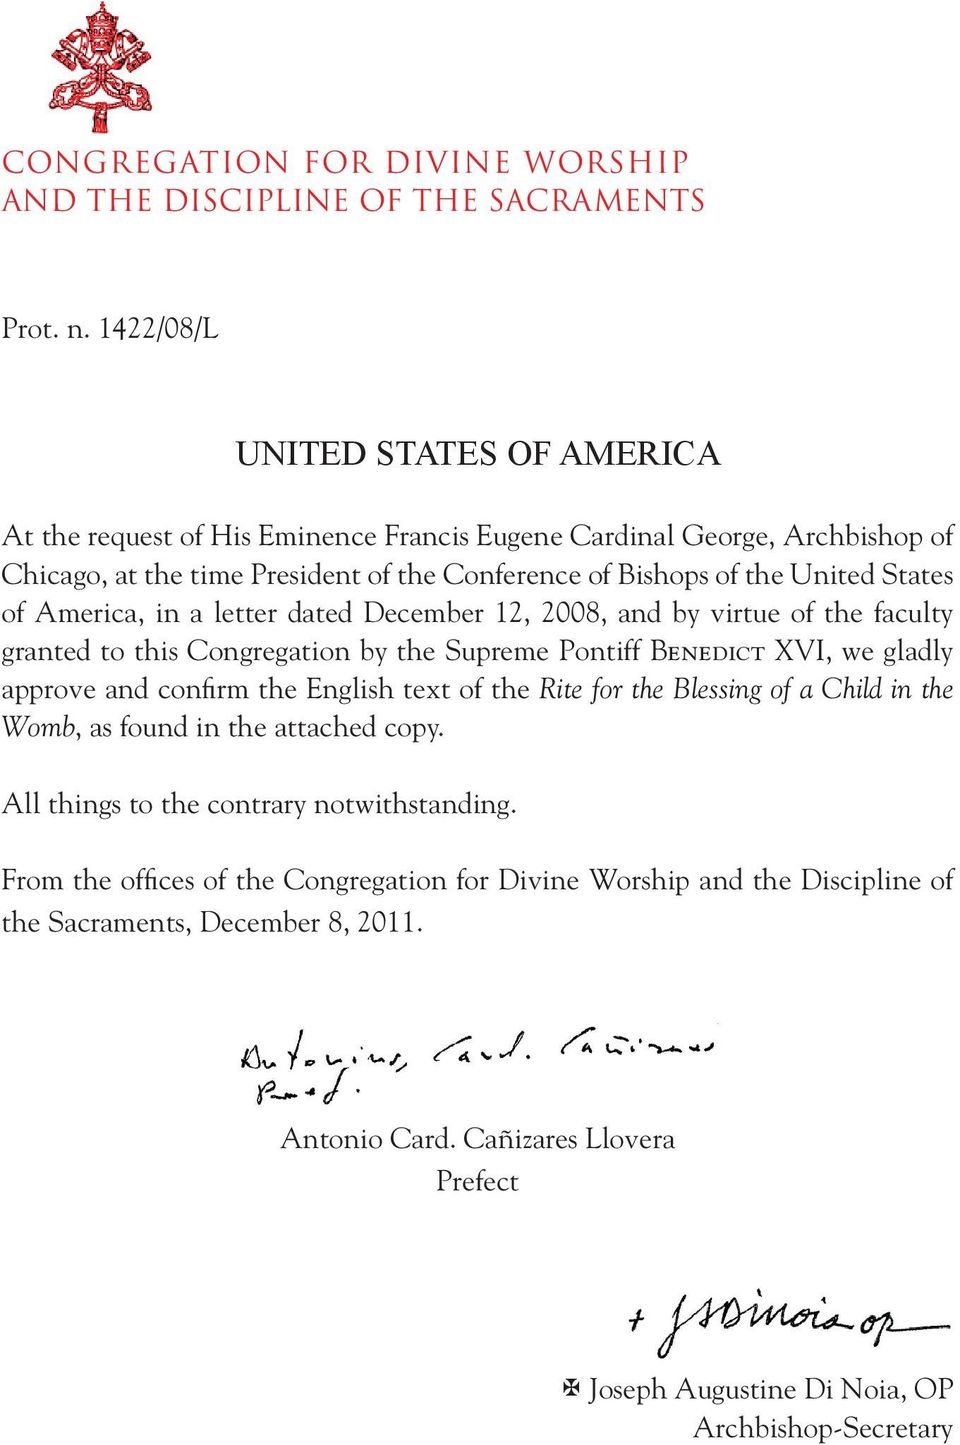 America, in a letter dated December 12, 2008, and by virtue of the faculty granted to this Congregation by the Supreme Pontiff Benedict XVI, we gladly approve and confirm the English text of the